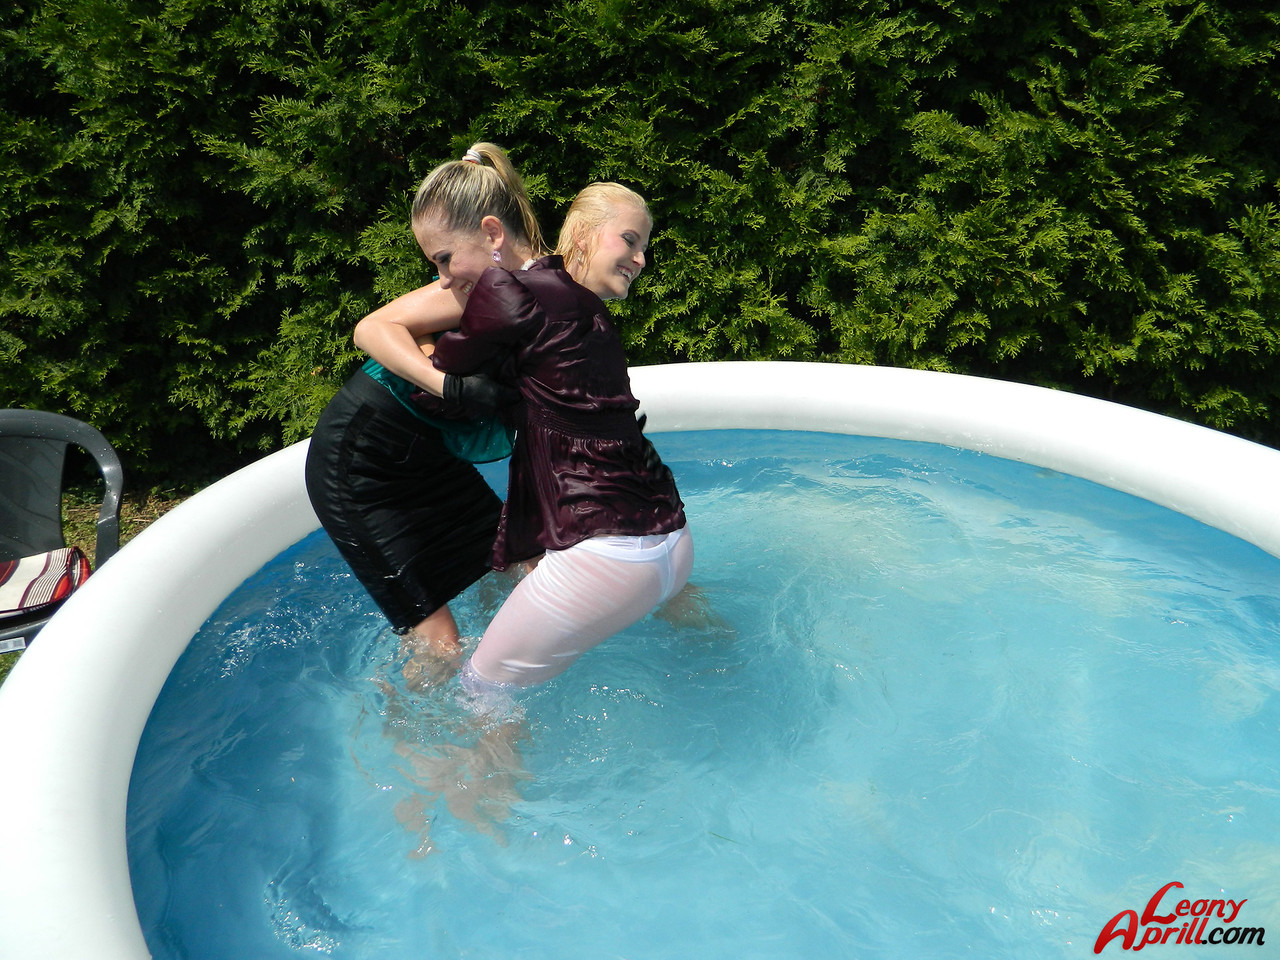 Clothed lesbians get soaking wet after getting into an above-ground pool foto porno #428457822 | Leony Aprill Pics, Lesbian, porno móvil